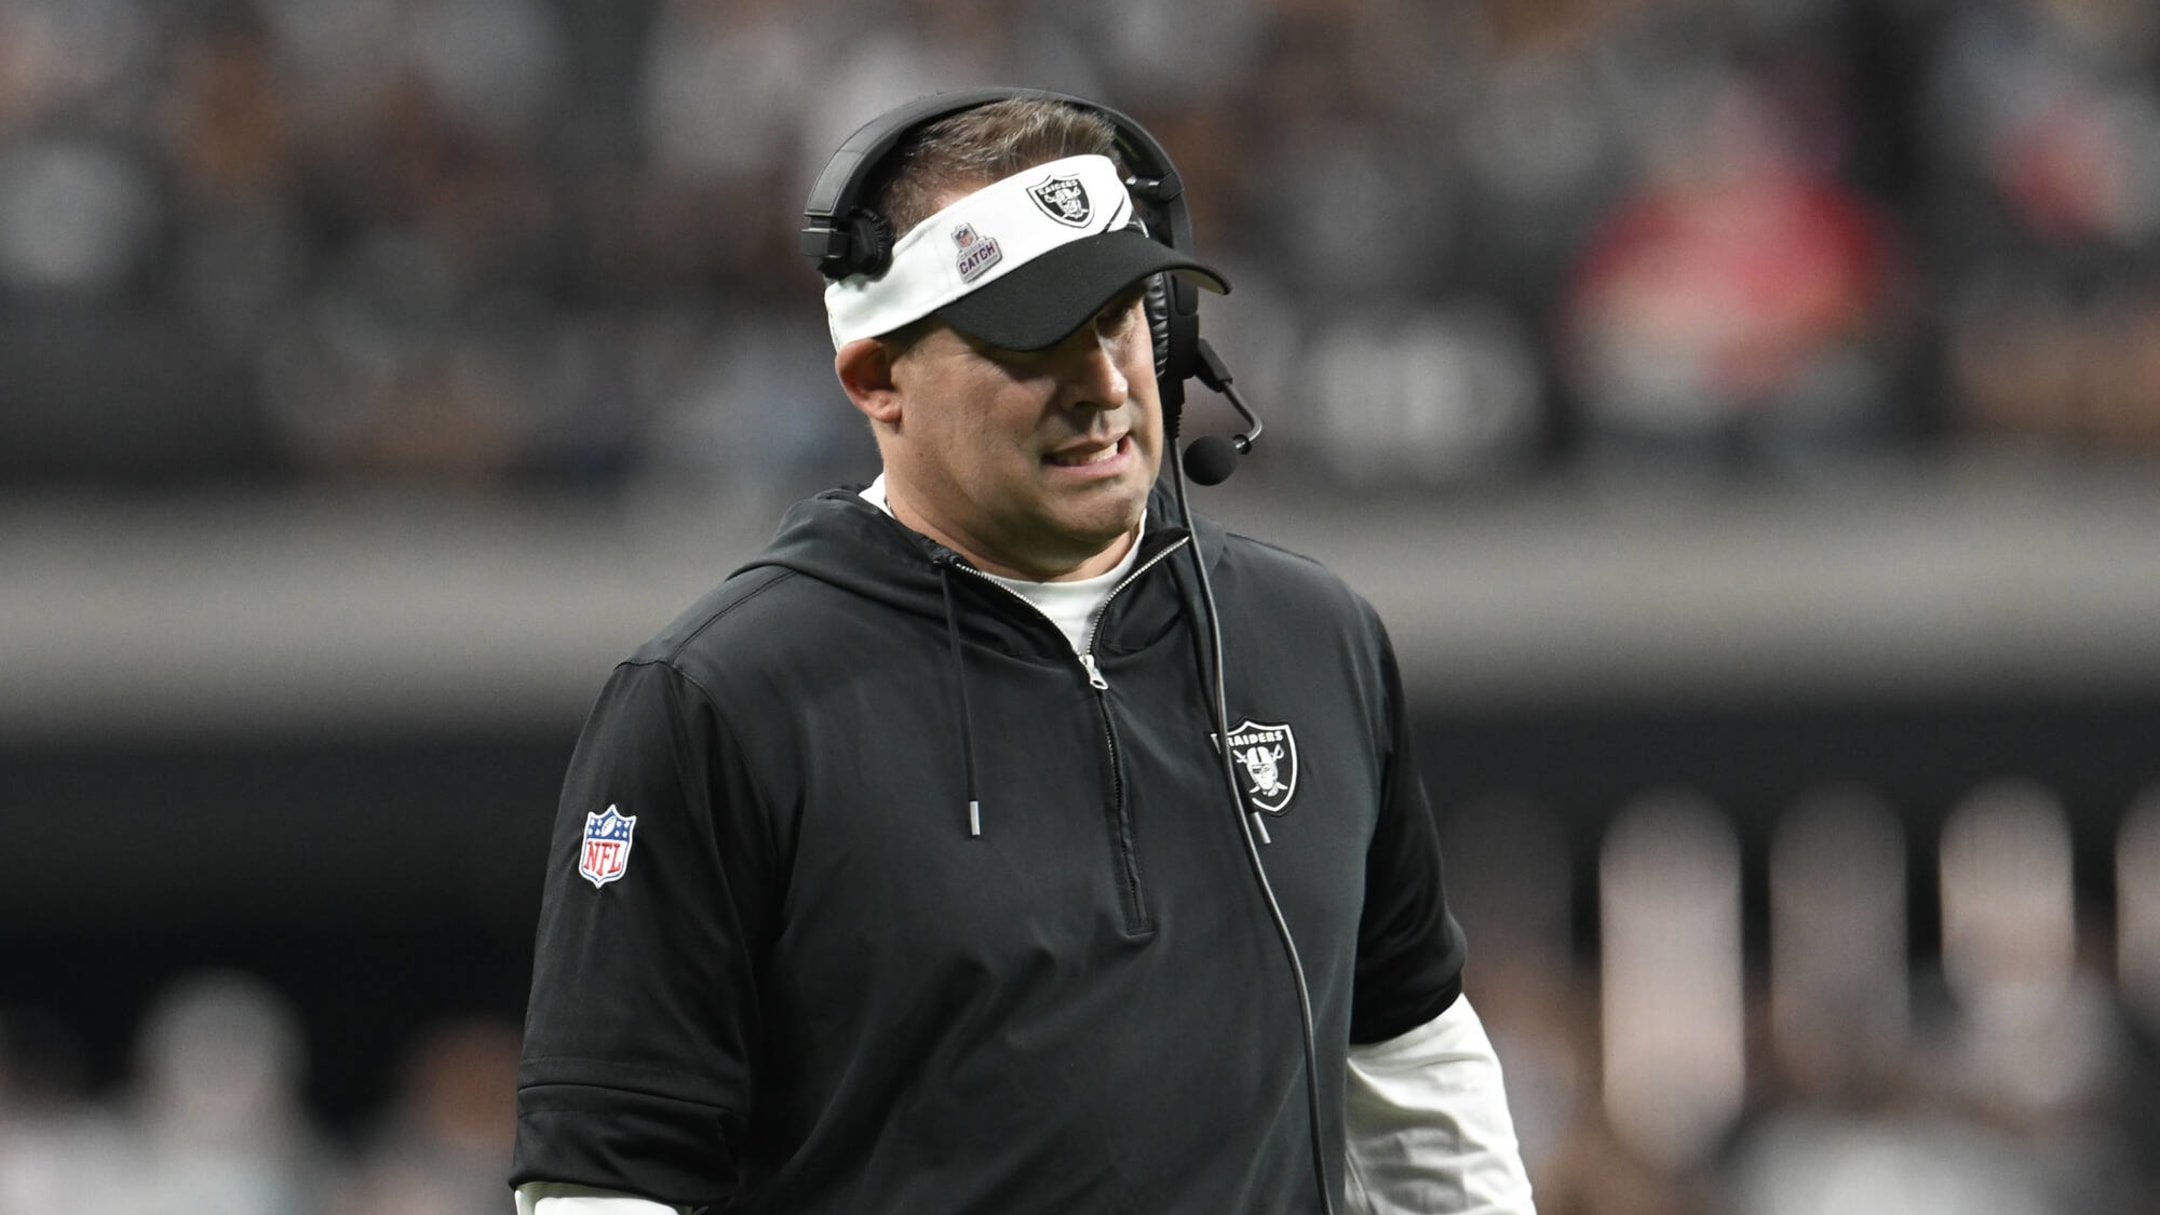 What's More Likely? Raiders Pick Top Five Or Raiders Make Playoffs